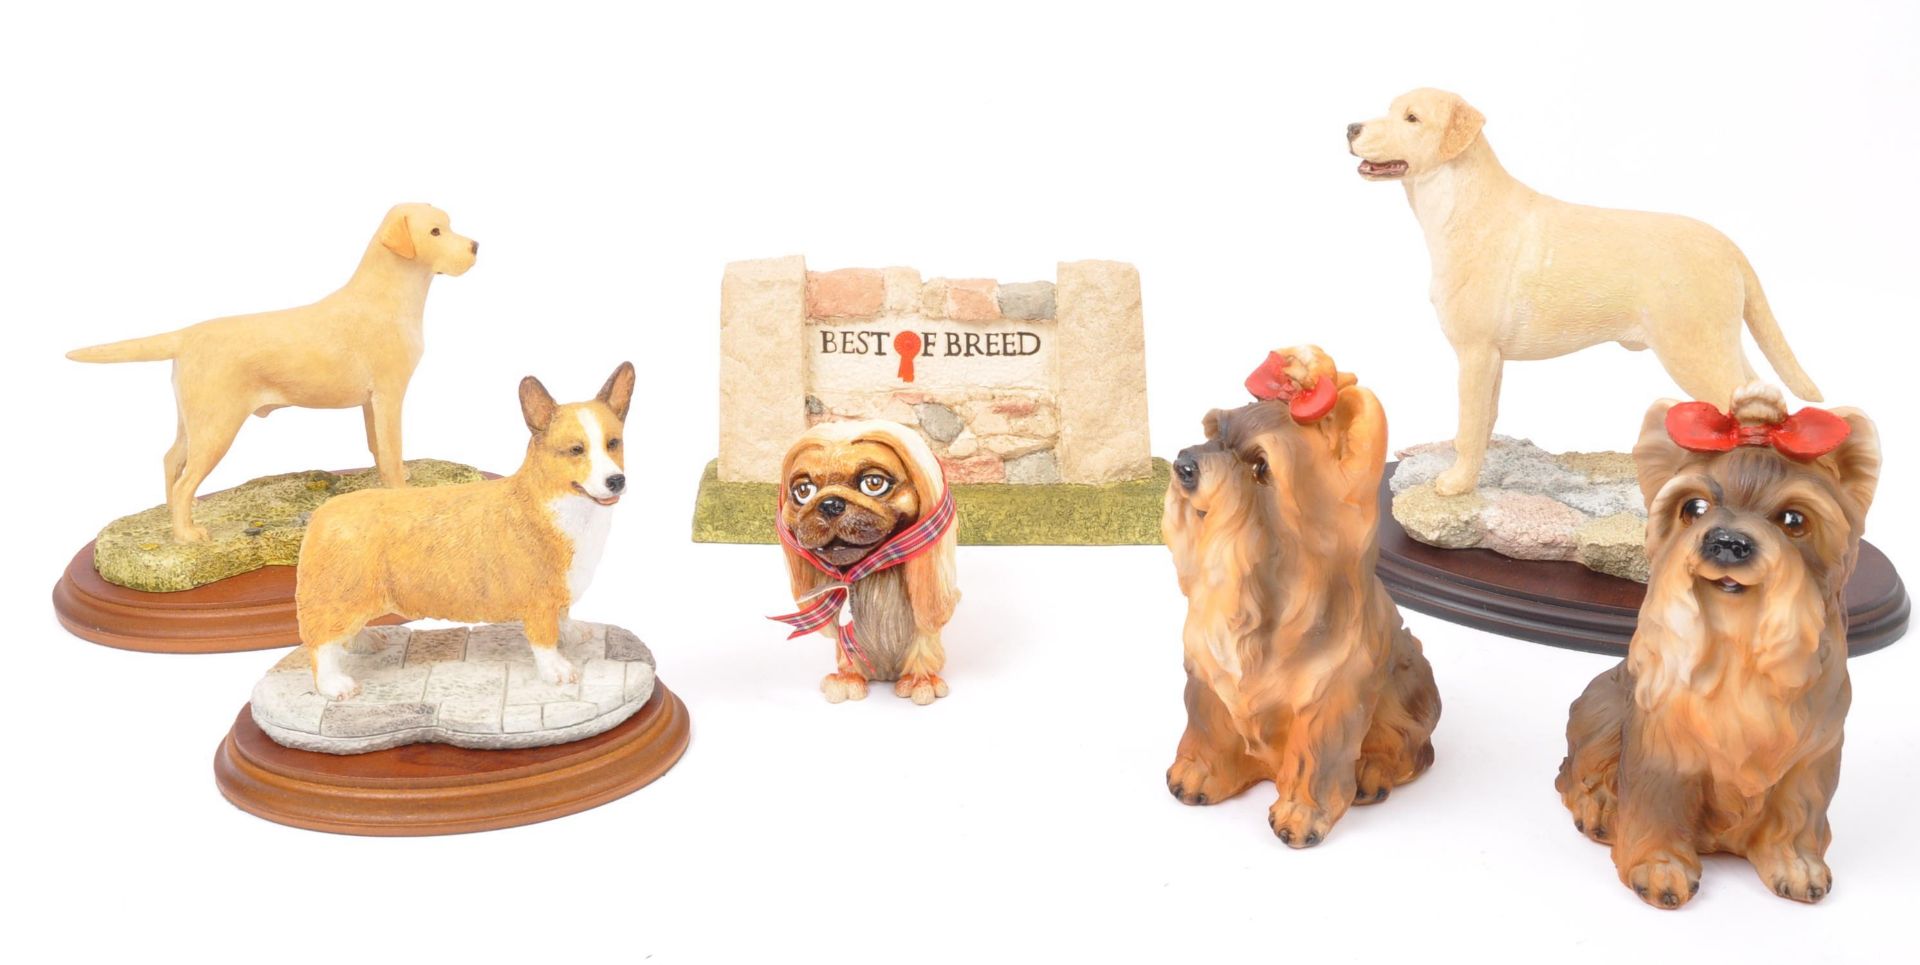 BEST OF BREED - NATURECRAFT - FIGURINES - MOSTLY NOS - Image 7 of 7